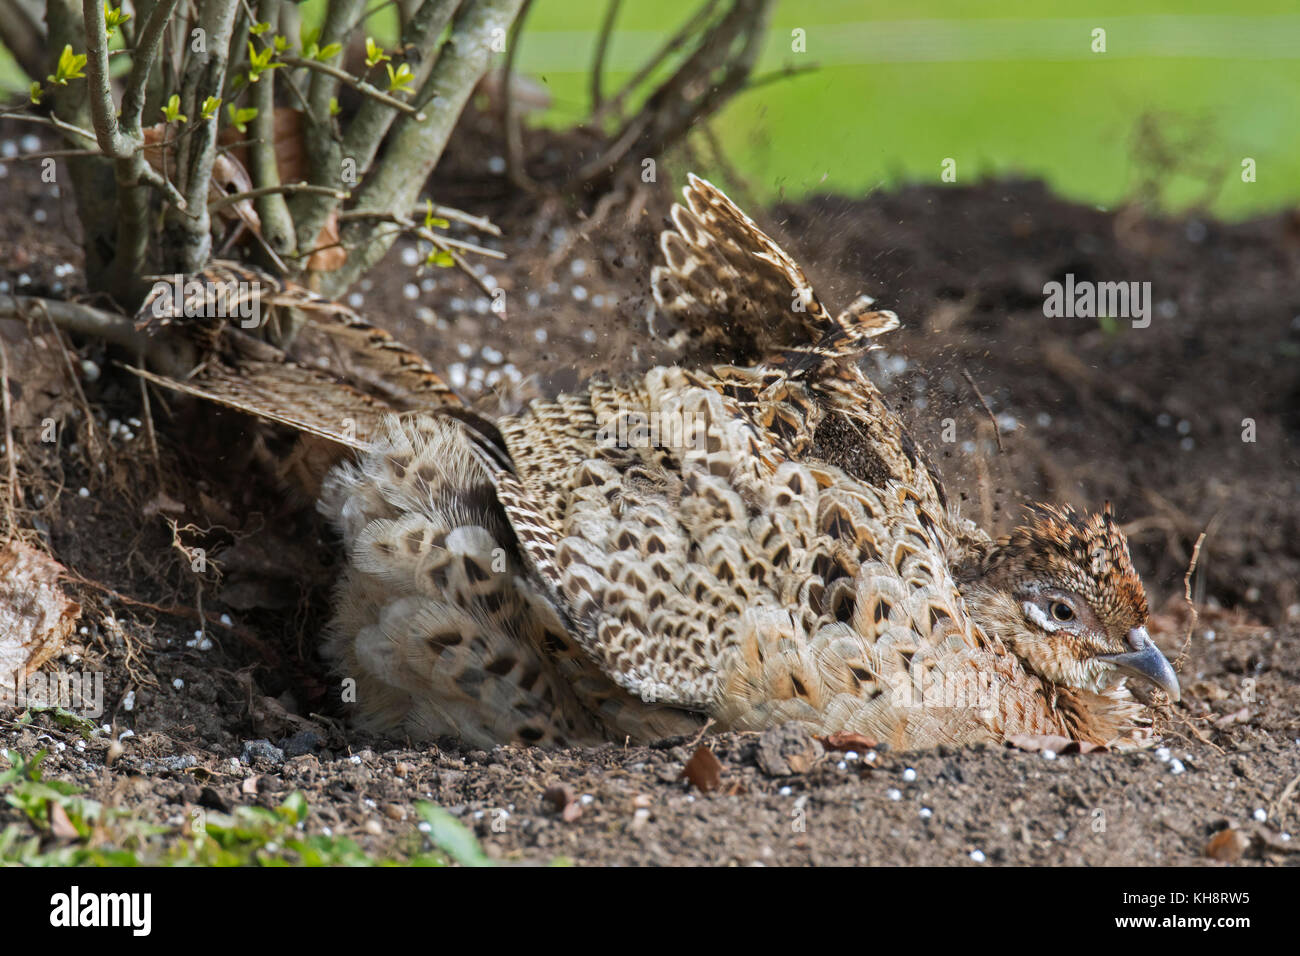 Common pheasant / Ring-necked pheasant (Phasianus colchicus) hen taking sand bath / dust bathing in spring Stock Photo